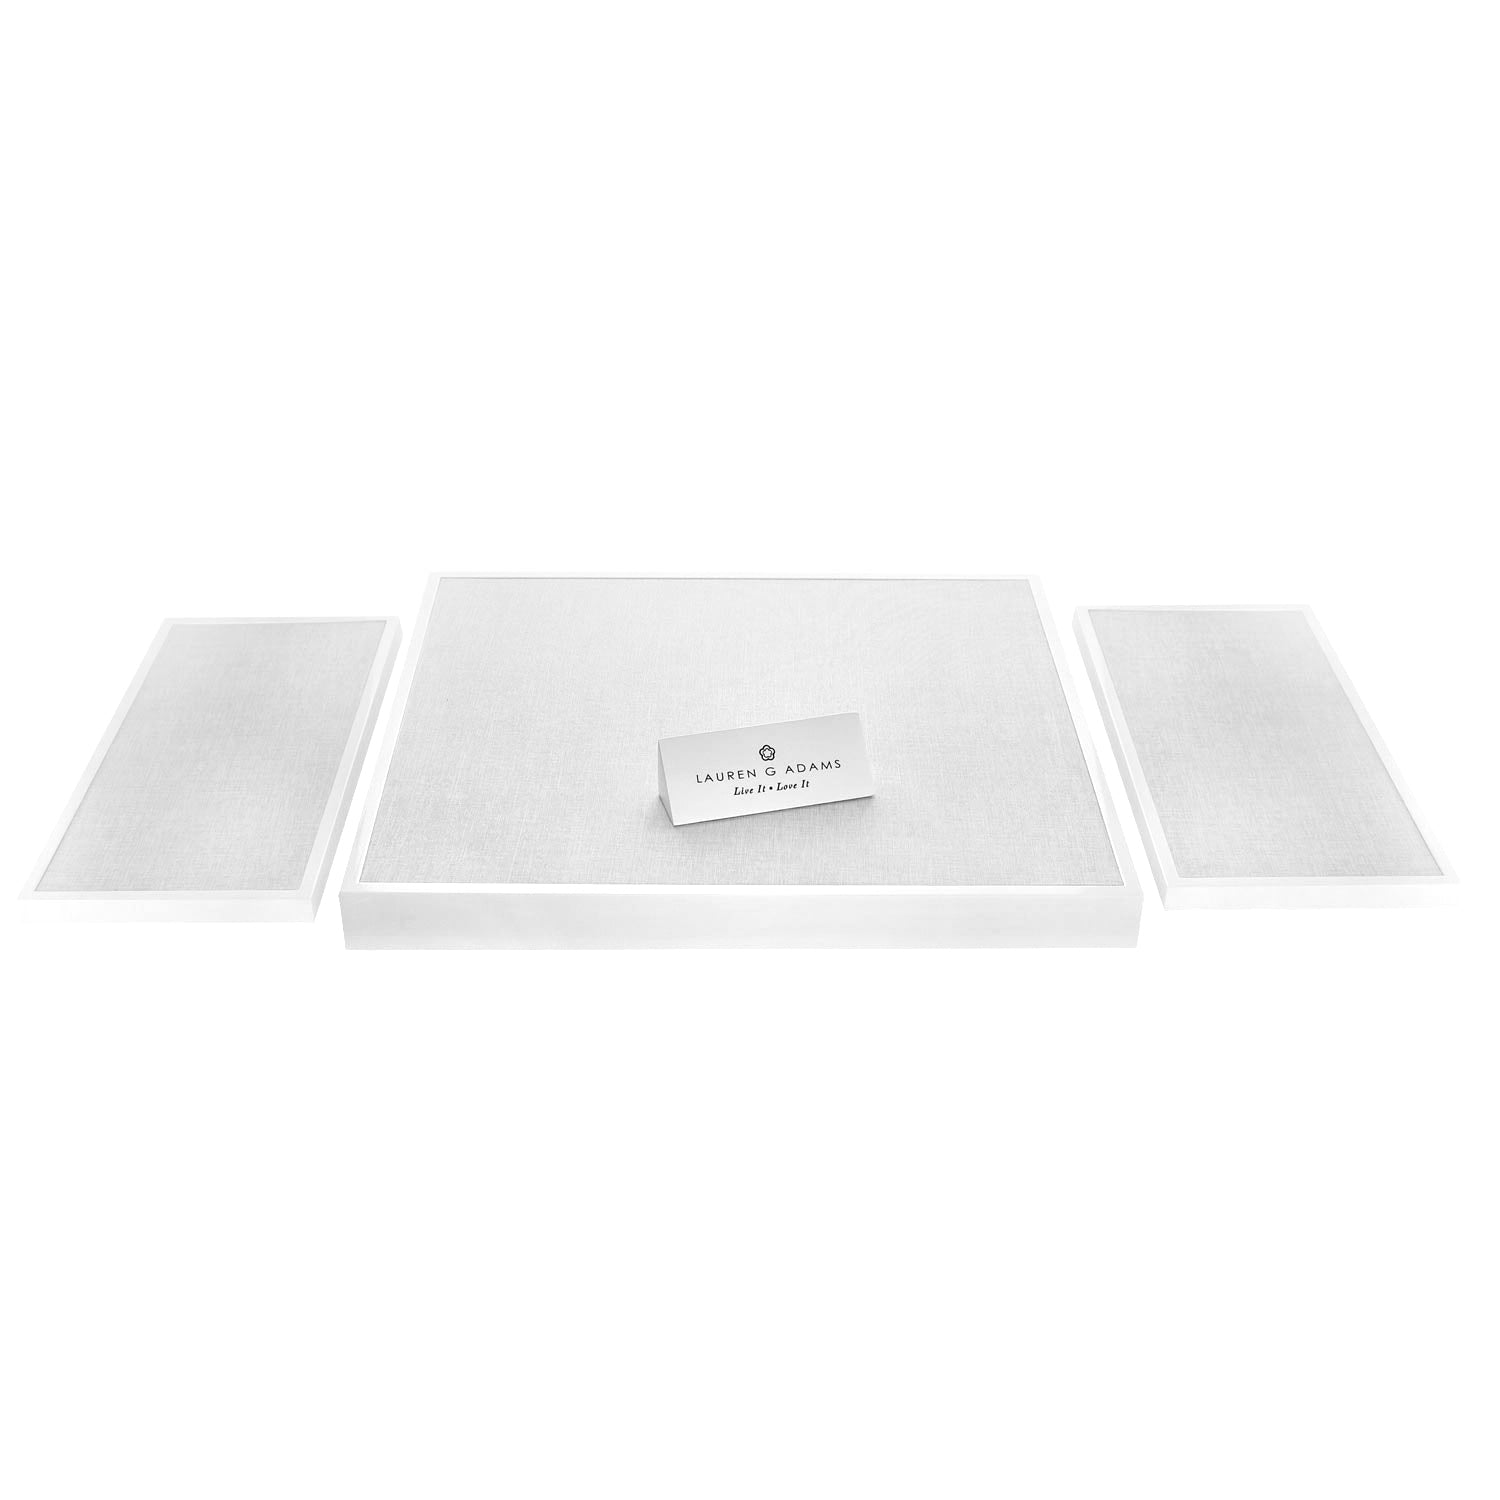 Display Base Set of 3 With Logo - Grey Linen and Glossy Pure  White Finish